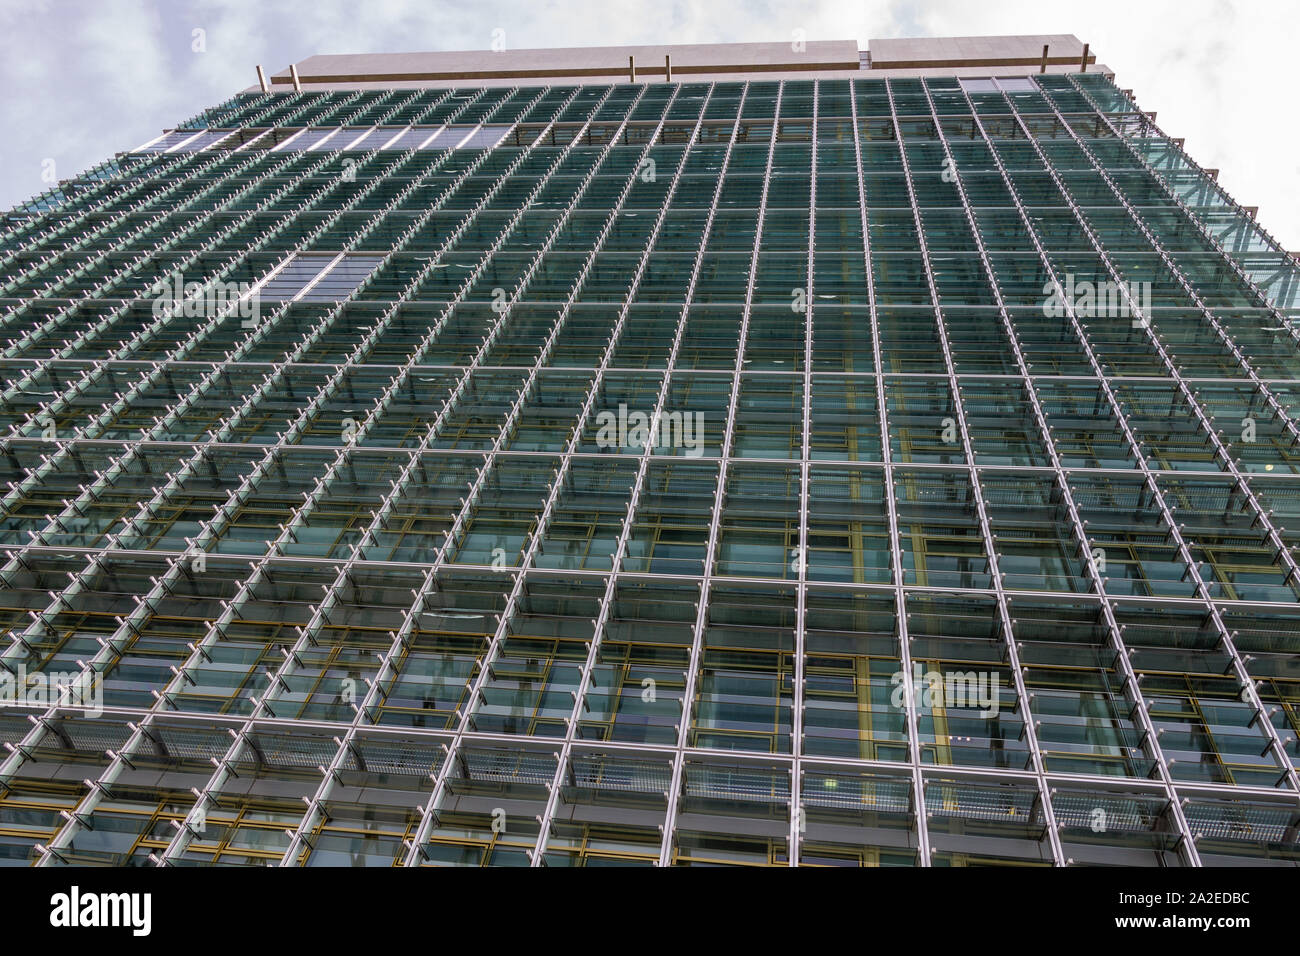 Cork county hall building with louvered glass facade cladding climate control Stock Photo